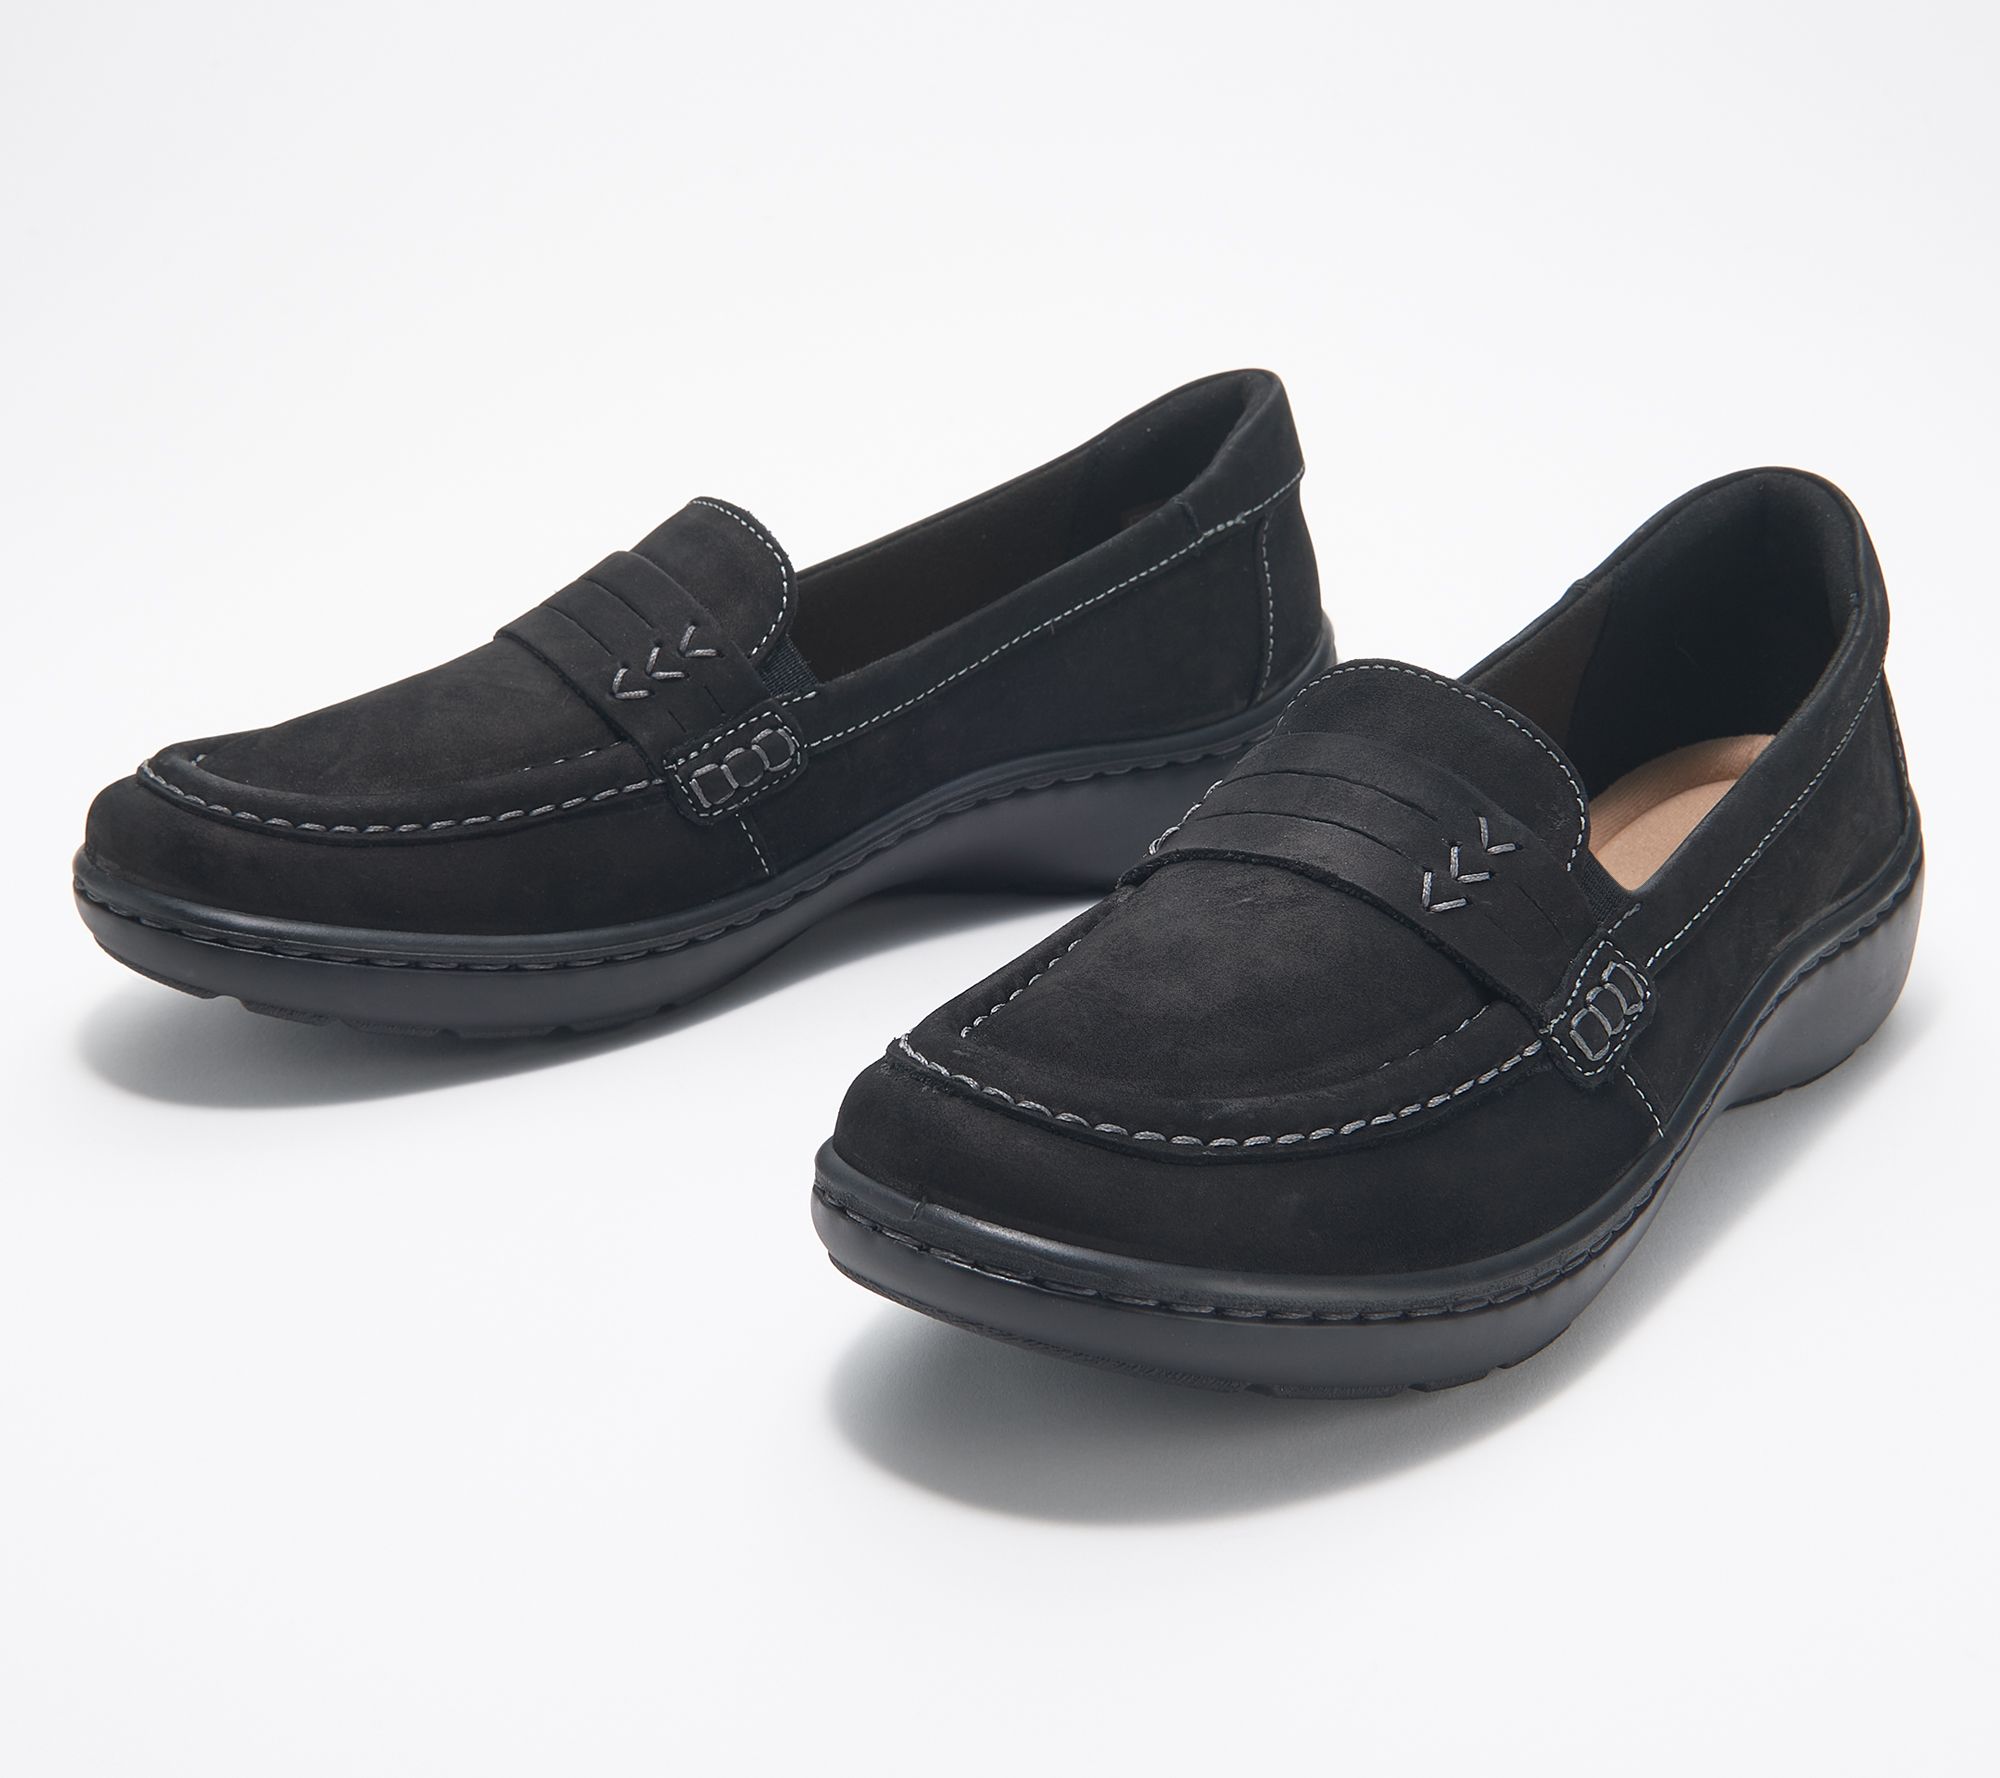 Clarks Leather Slip-On Loafers - Cora QVC.com